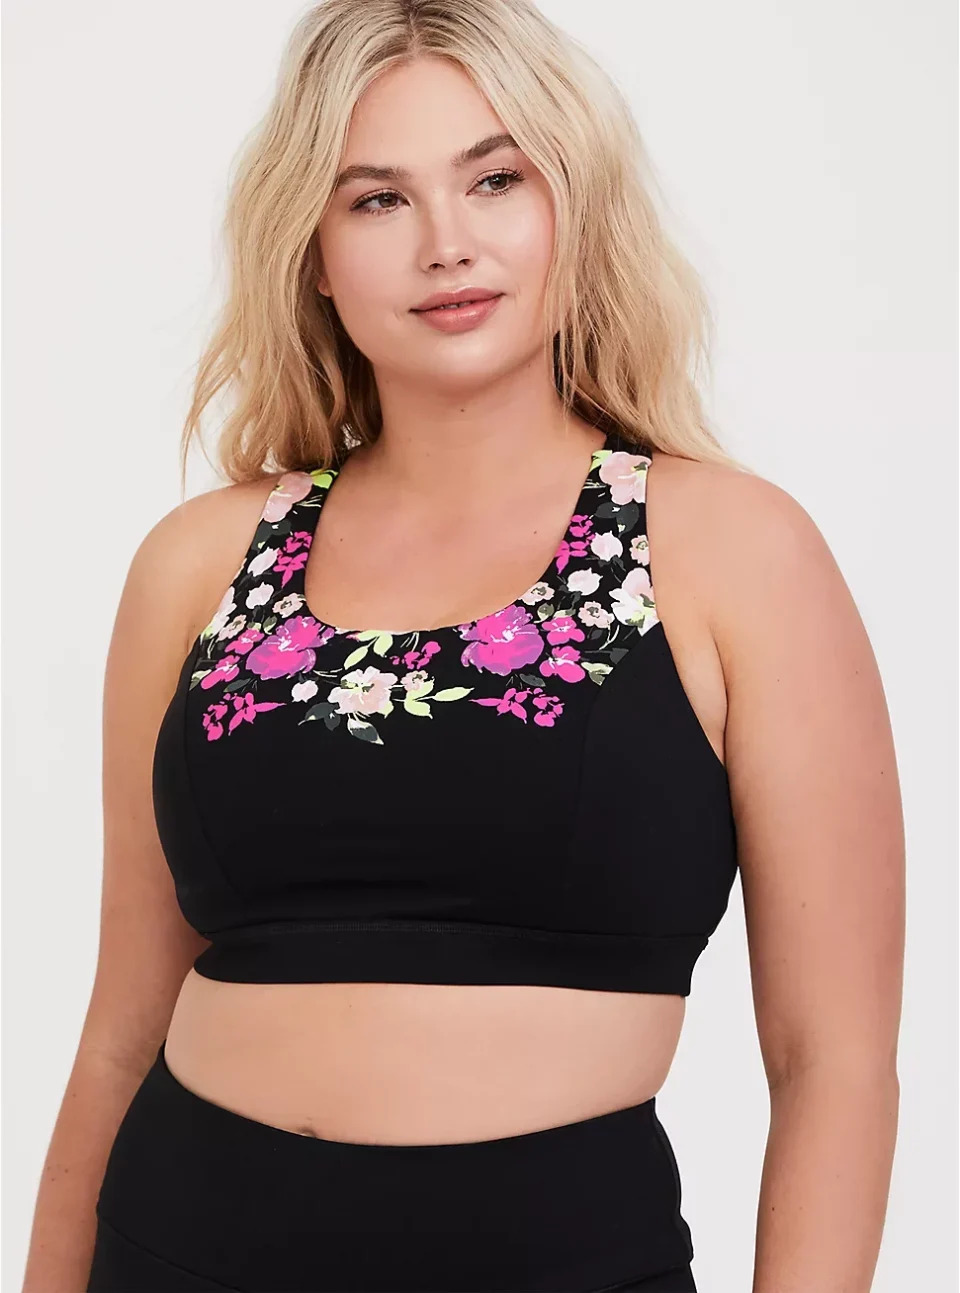 This bra comes in sizes in 1X to 6X. <a href="https://fave.co/2slwkp5" target="_blank" rel="noopener noreferrer">Get it for $43 at Torrid</a>.